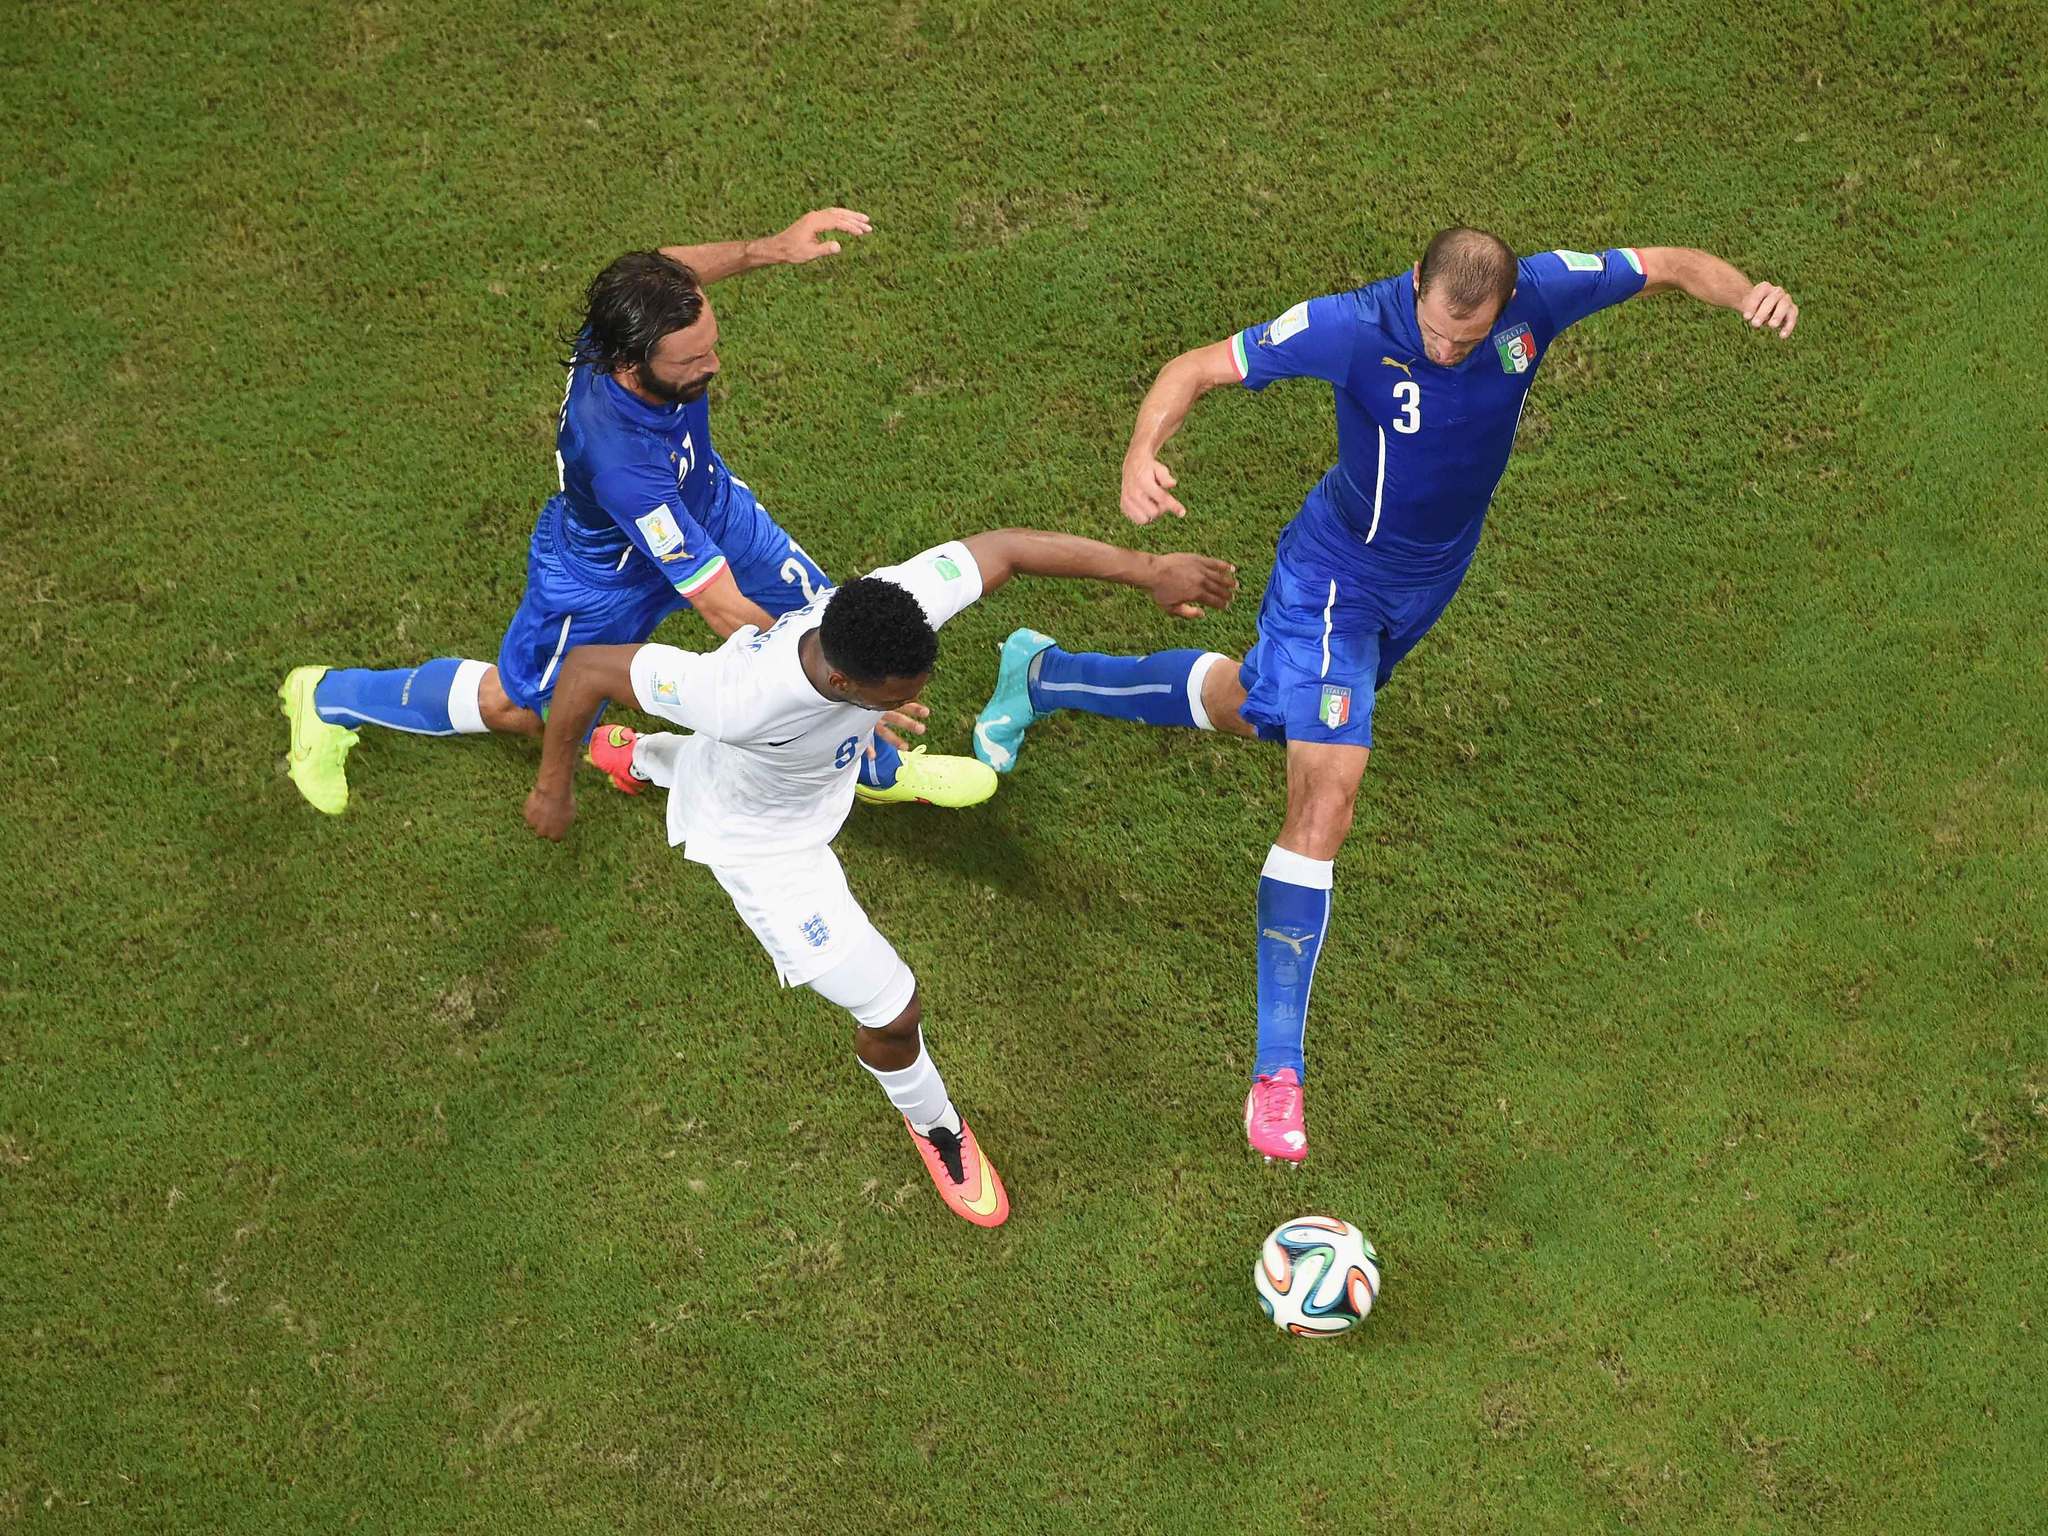 Andrea Pirlo and Giorgio Chiellini of Italy close down Daniel Sturridge of England during the World Cup Brazil Group D match between England and Italy in Manaus, Brazil.